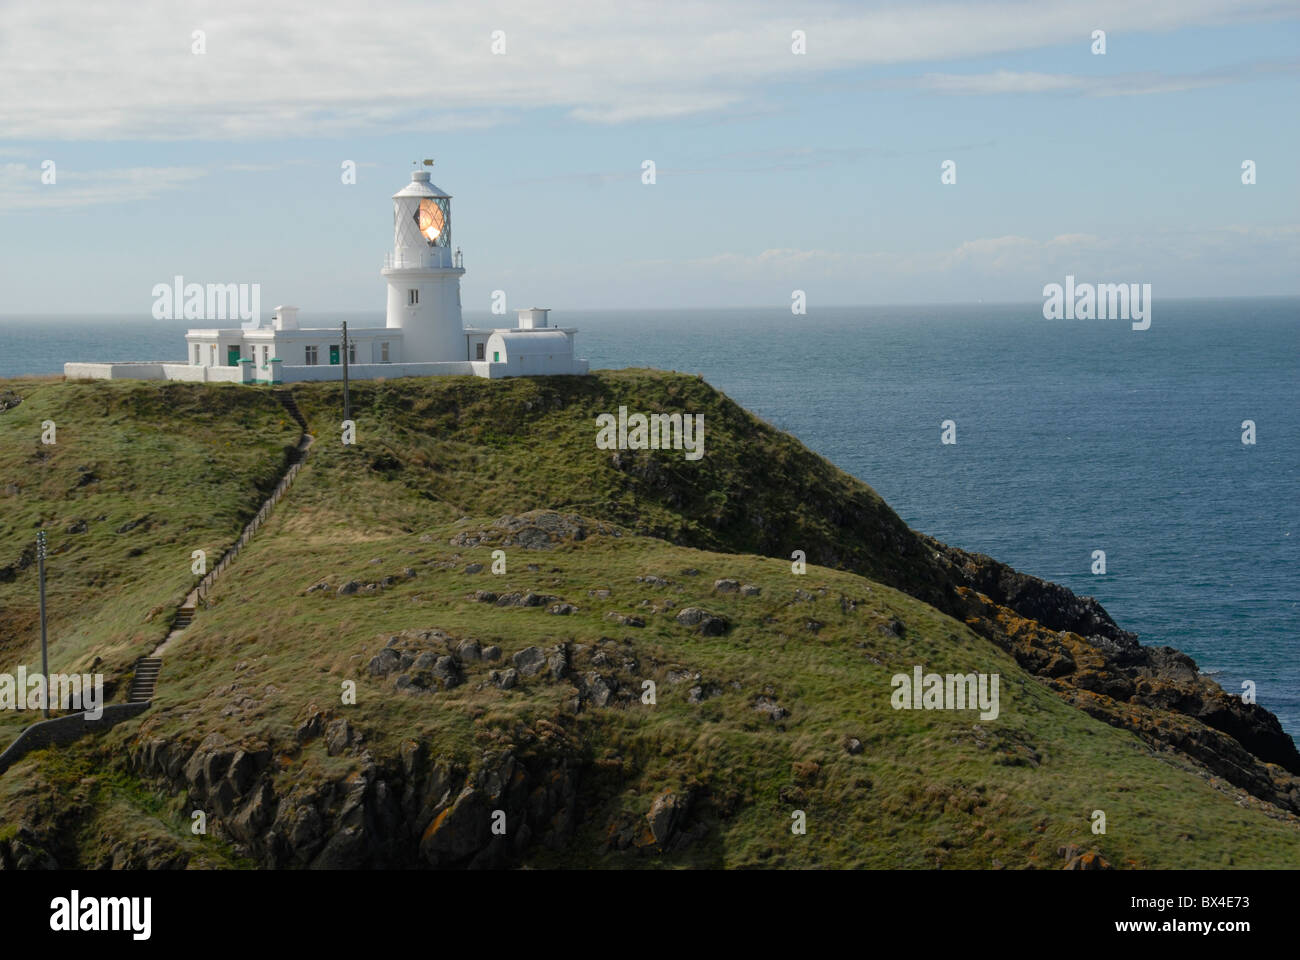 St Ann's Head lighthouse on the Pembrokeshire coastal path, south wales Stock Photo